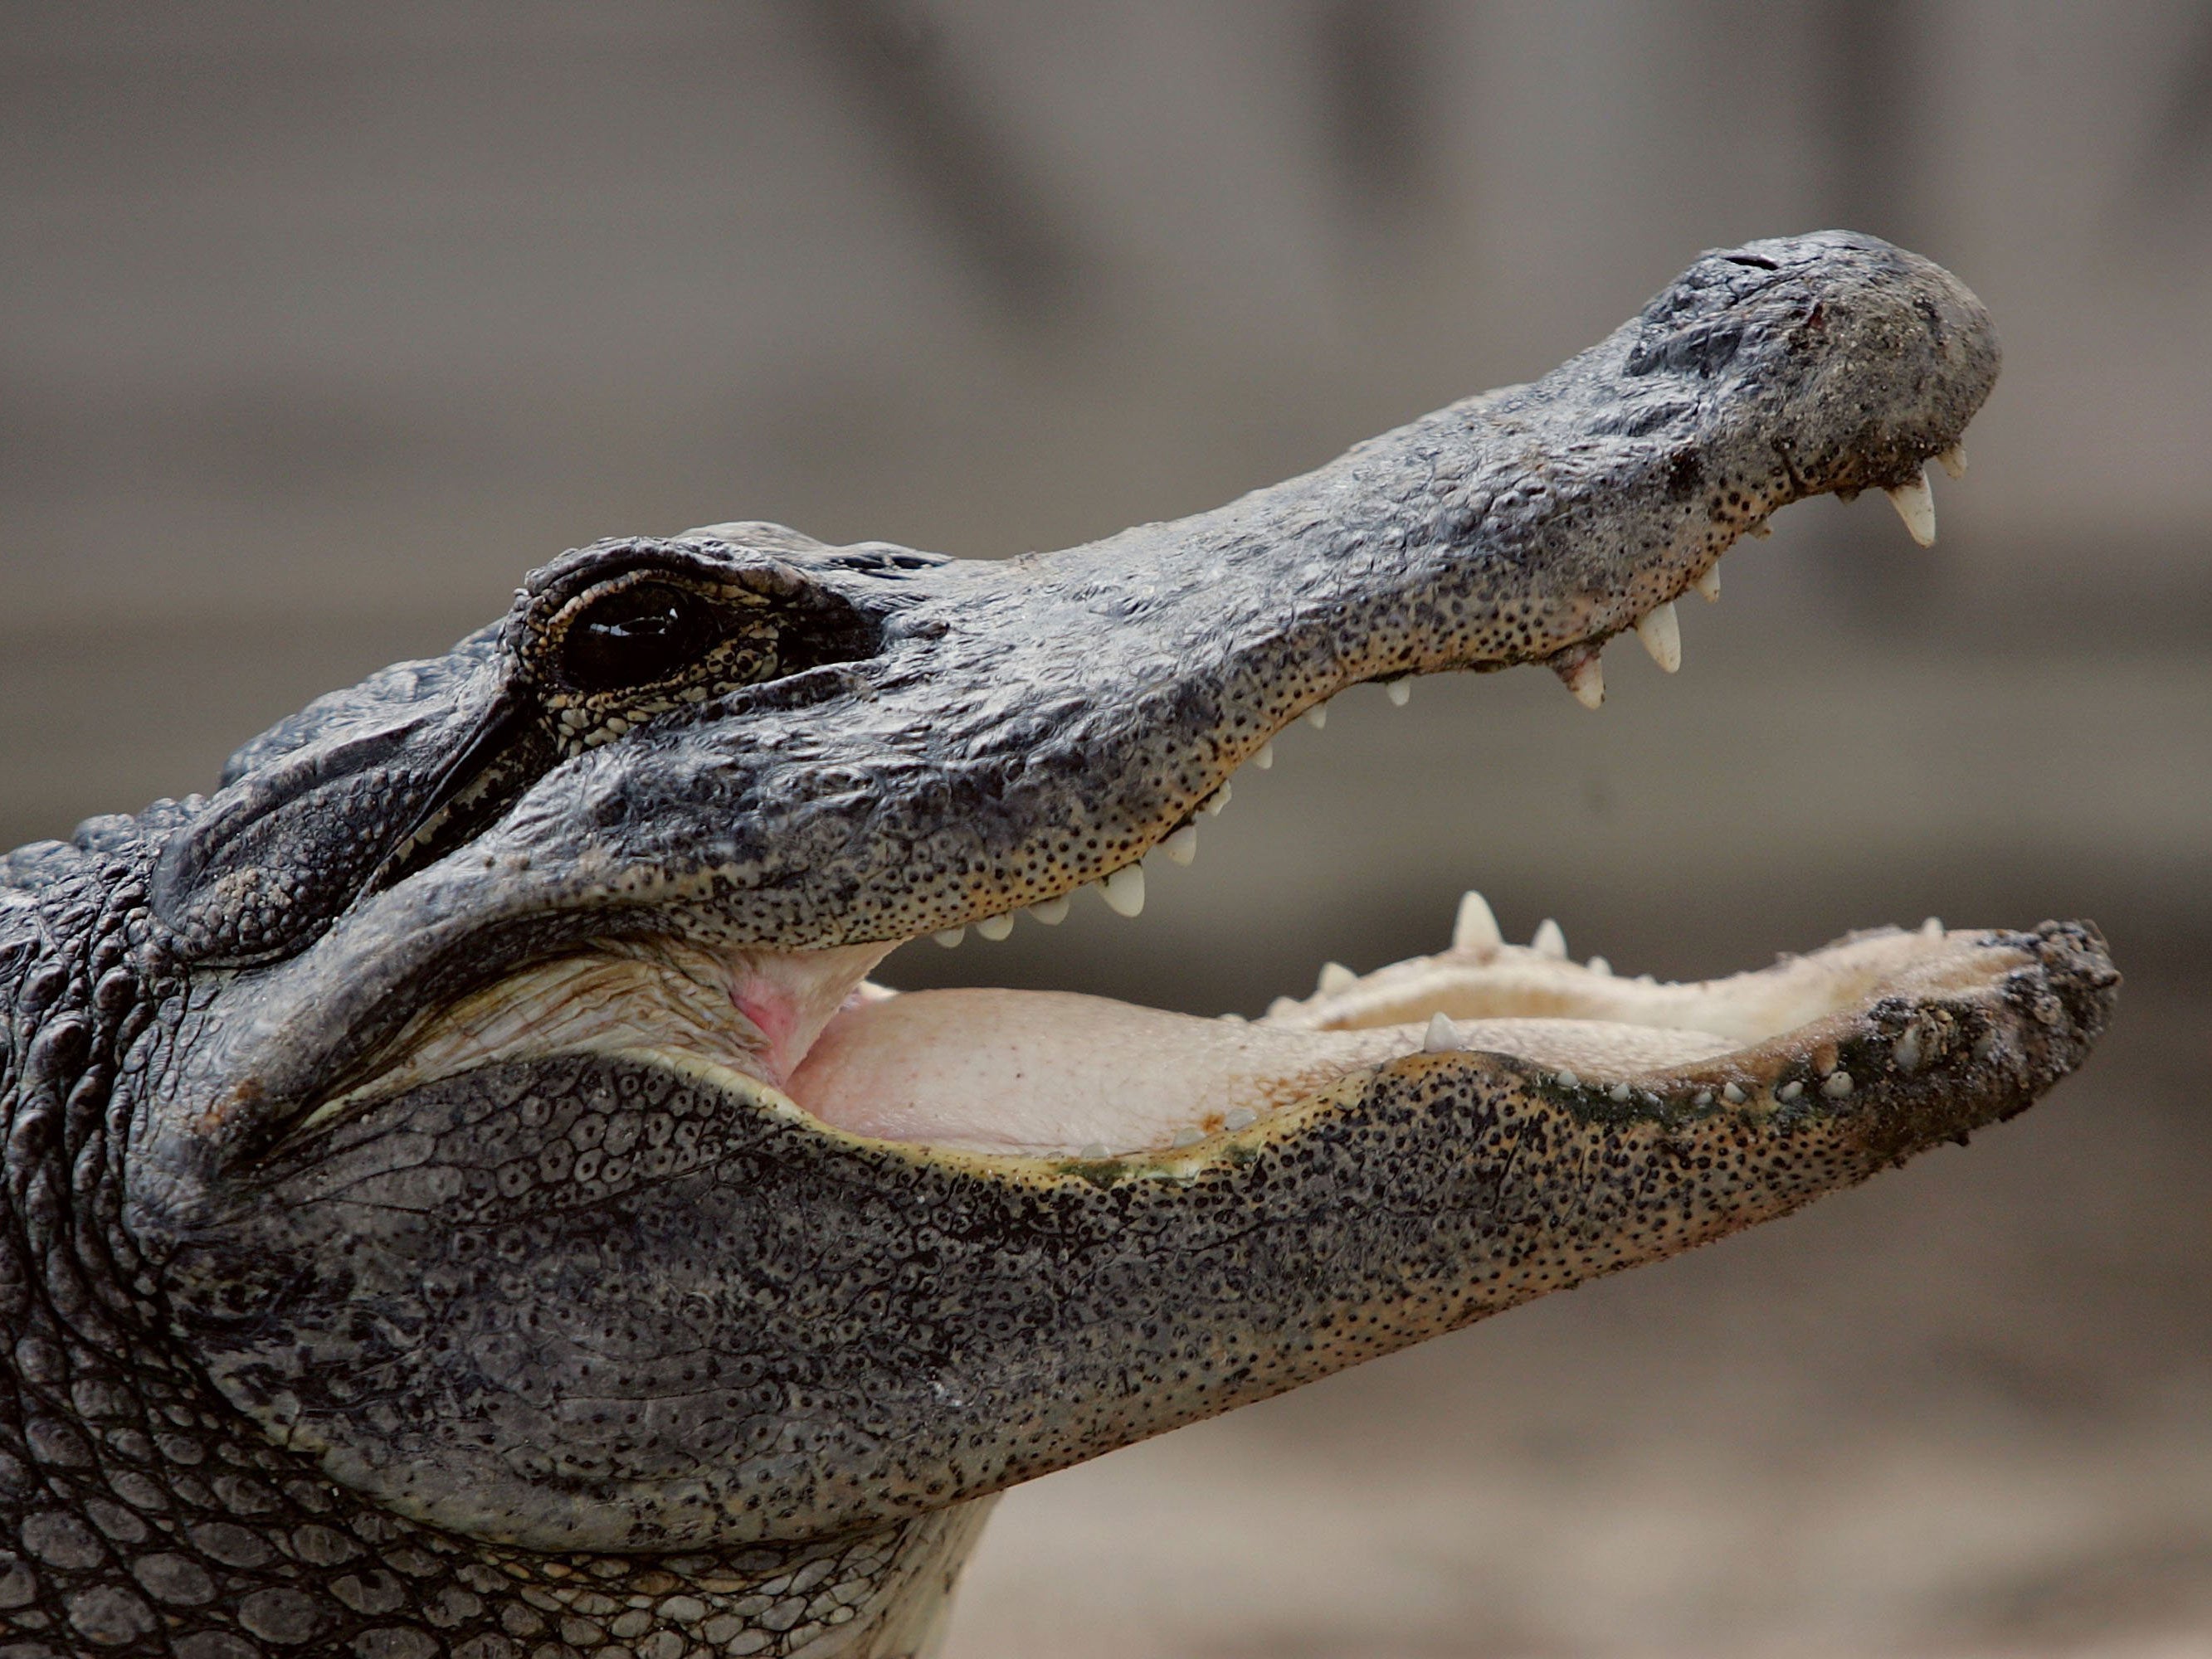 An alligator bears its teeth at a park in the Florida Everglades